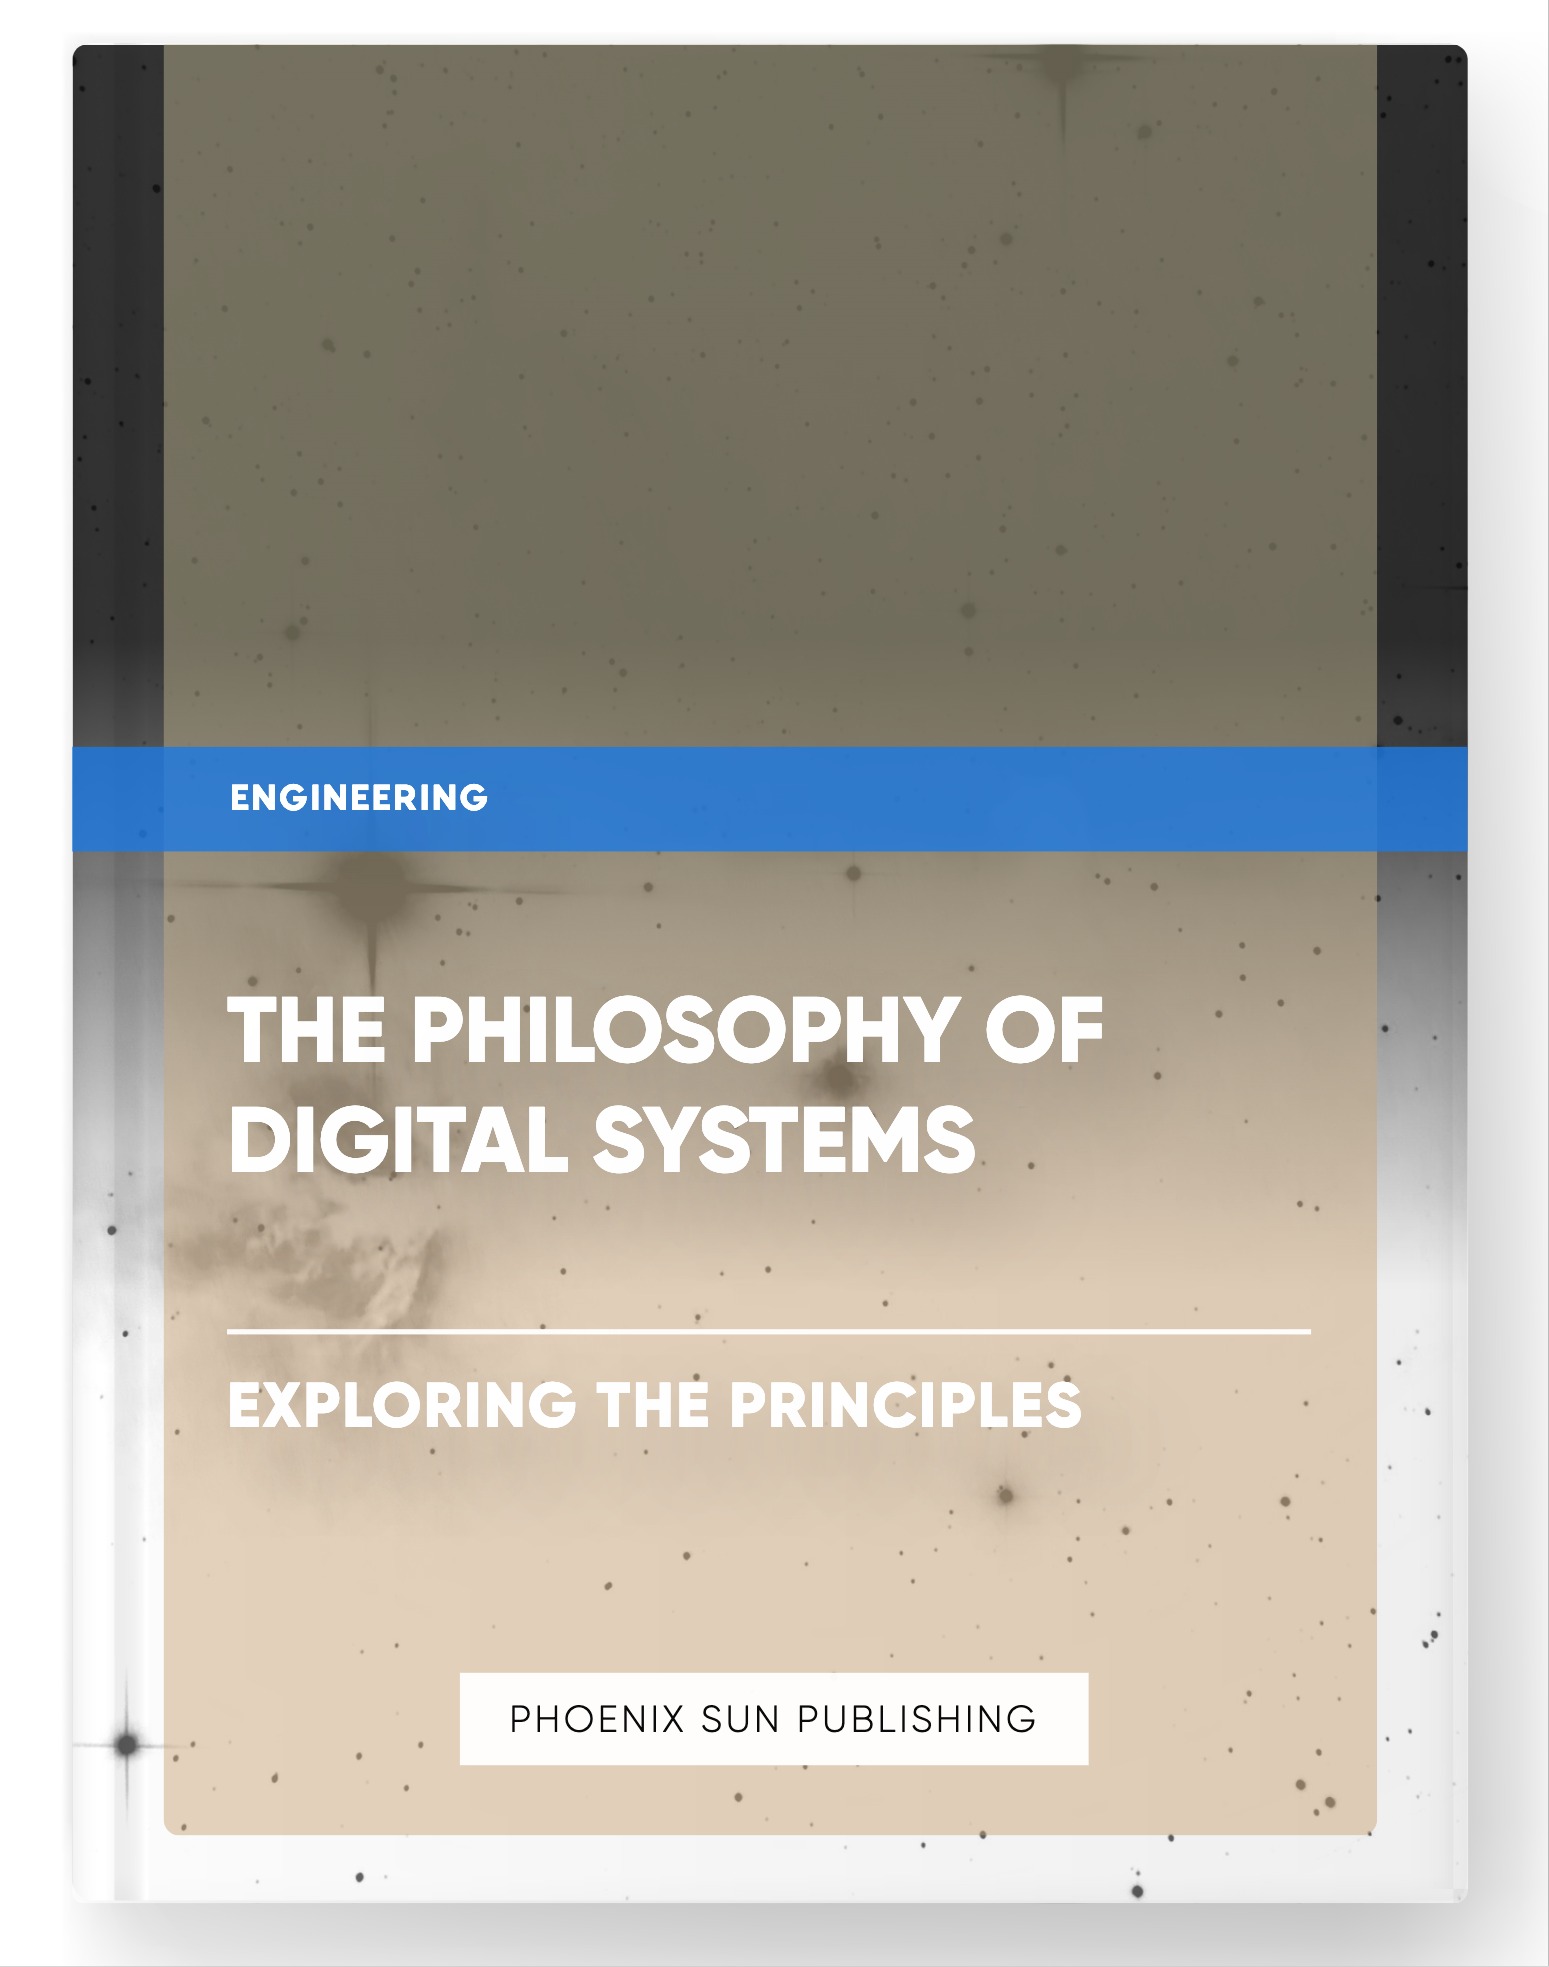 The Philosophy of Digital Systems – Exploring the Principles